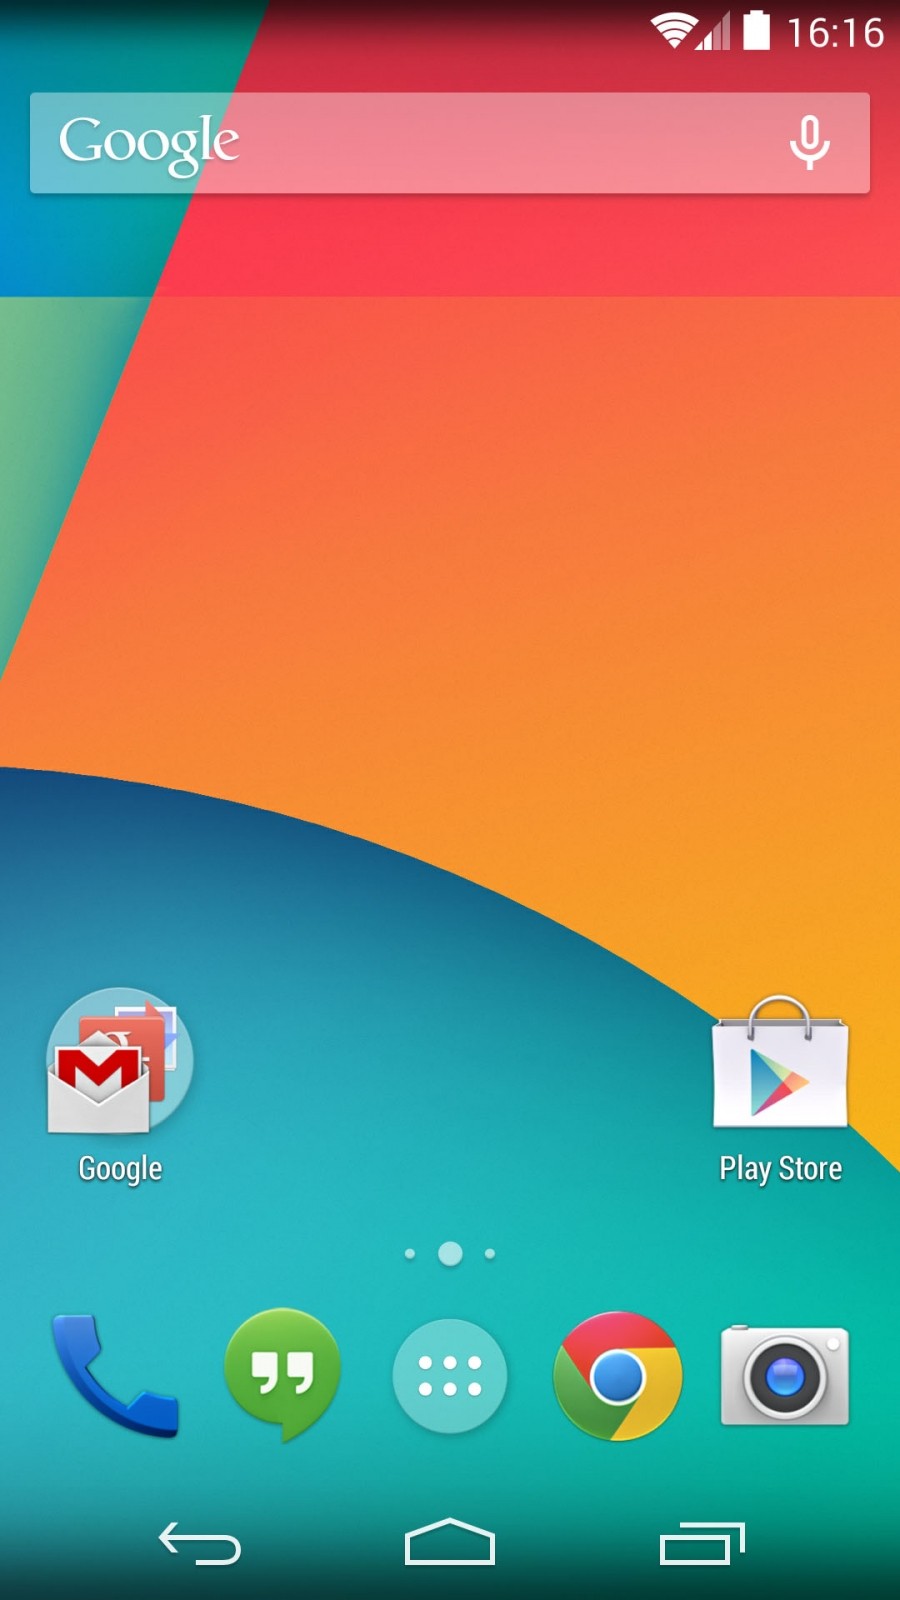 Google Experience Launcher